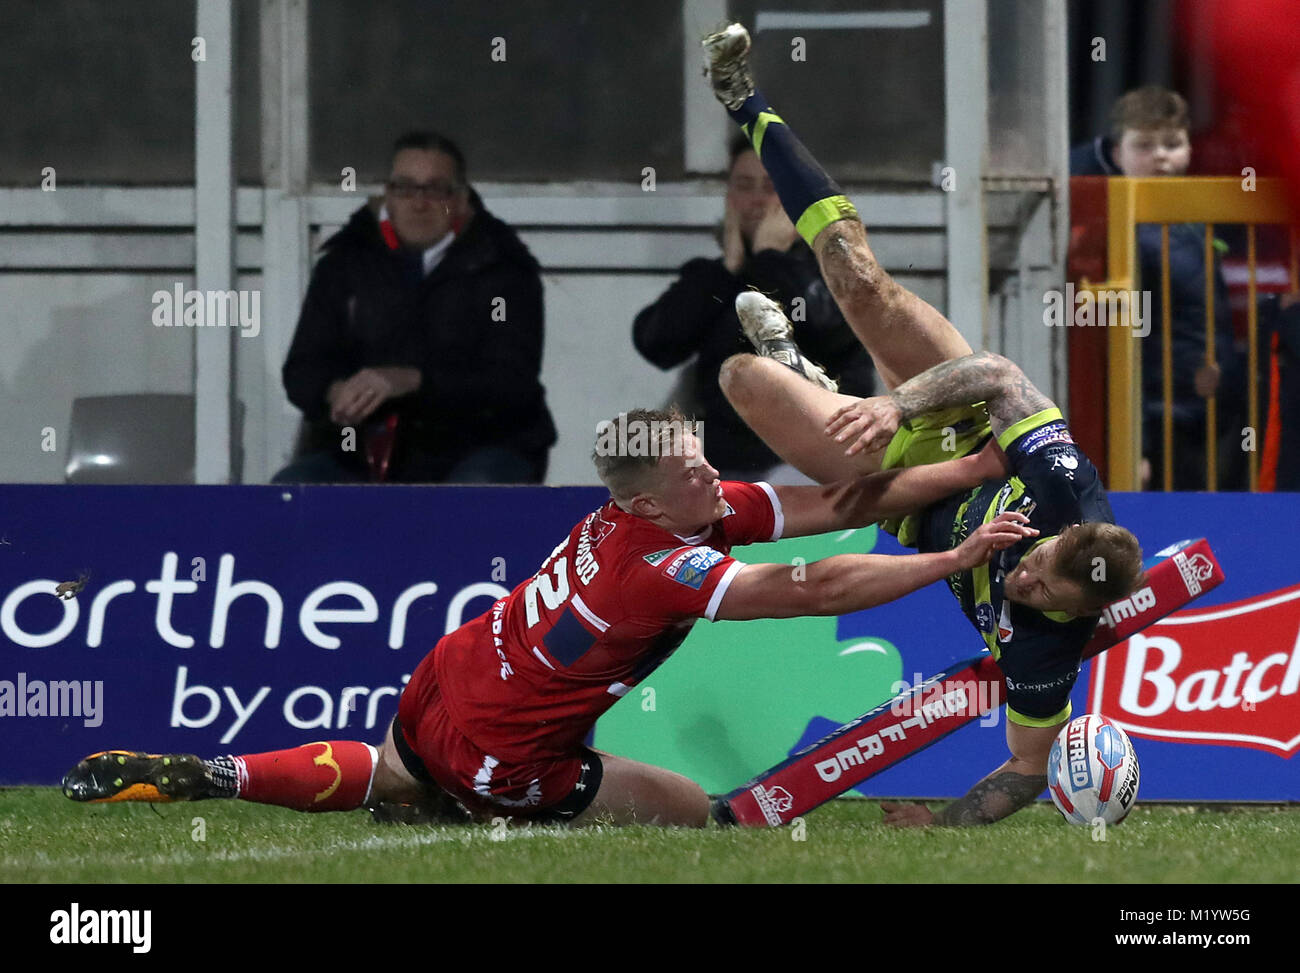 Wakefiekd Trinity's Tom Johnstone (right) dives in to score his sides first try of the game during the Betfred Super League match at Craven Park, Hull. Stock Photo